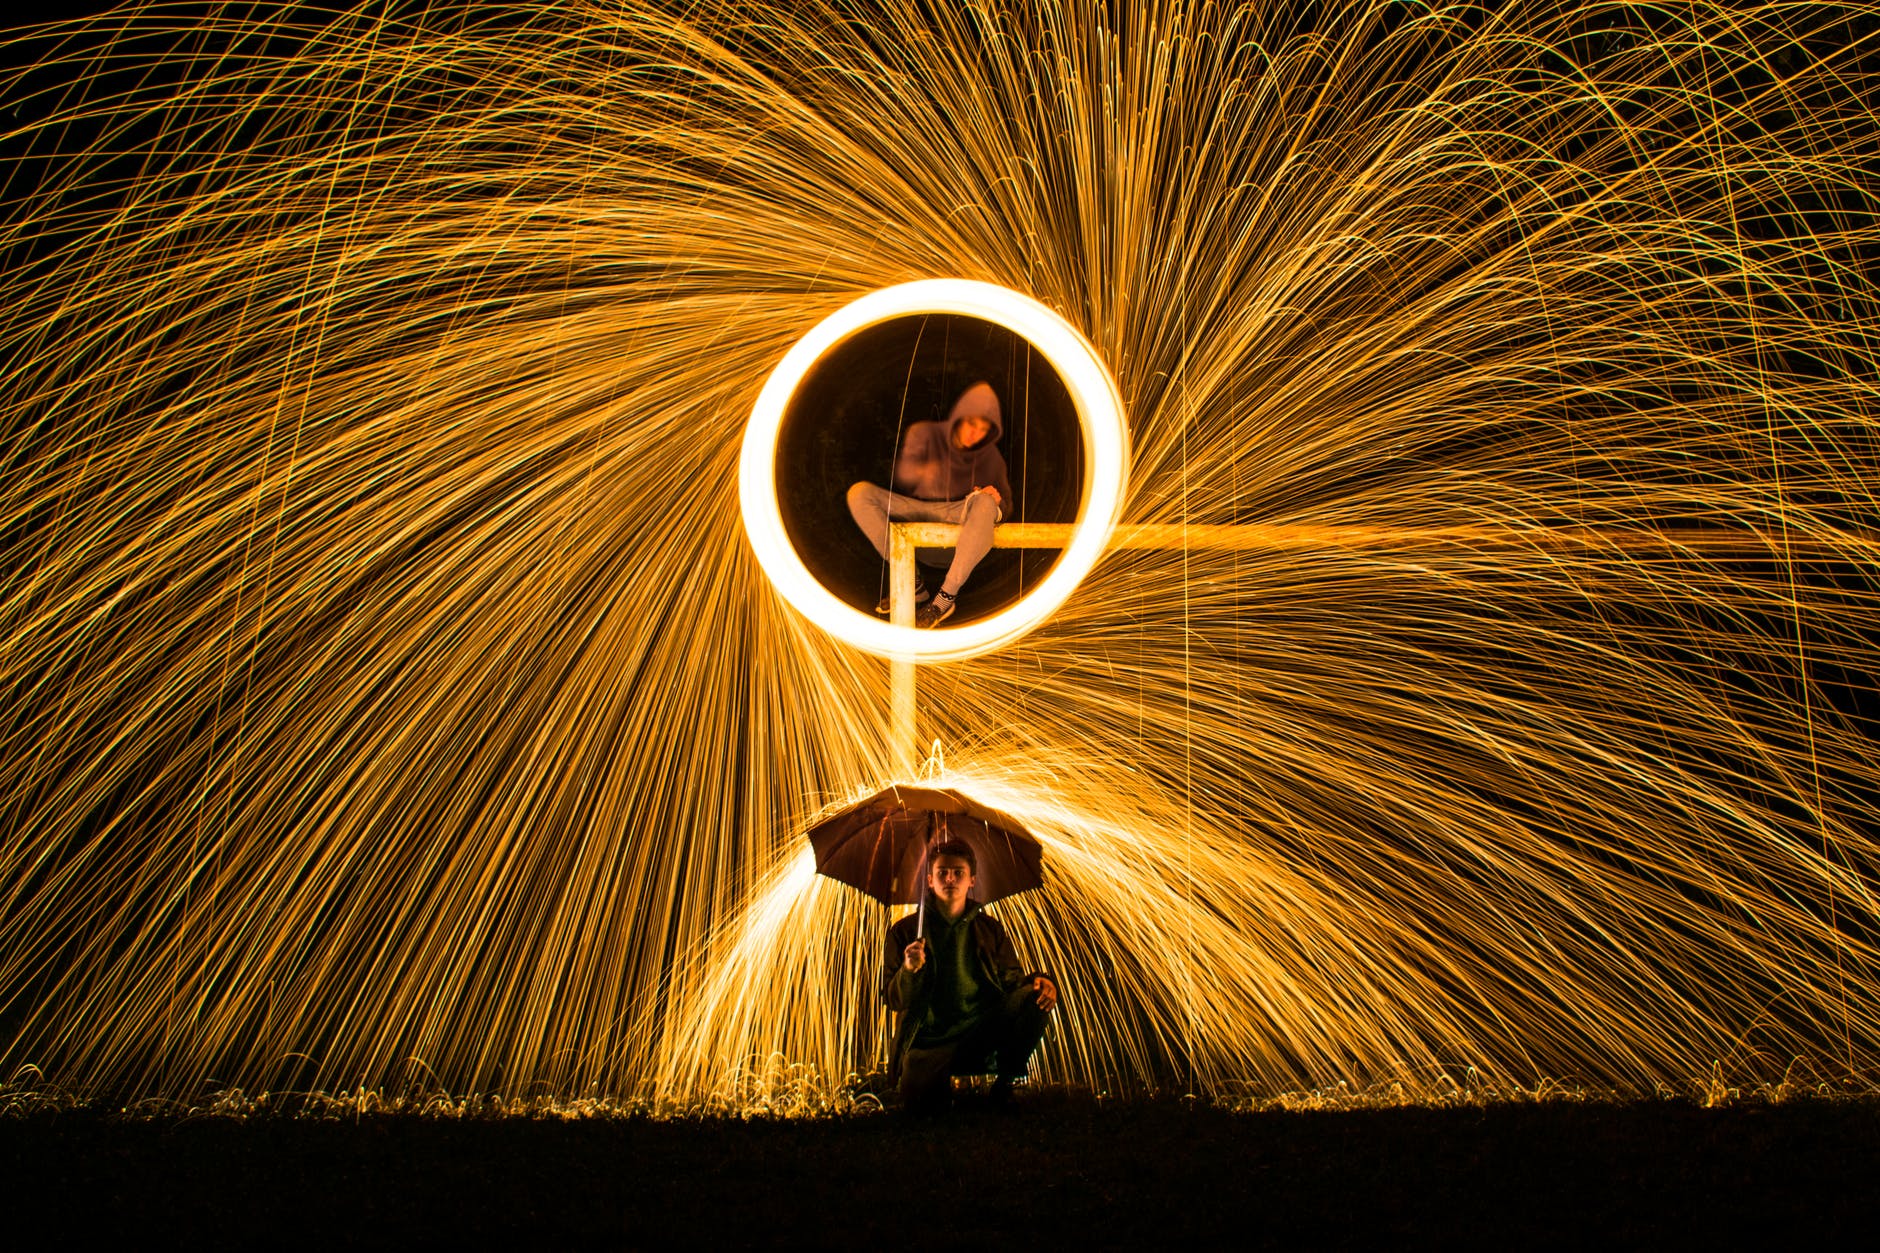 time lapse photography of person making firework spark under person holding umbrella during nighttime